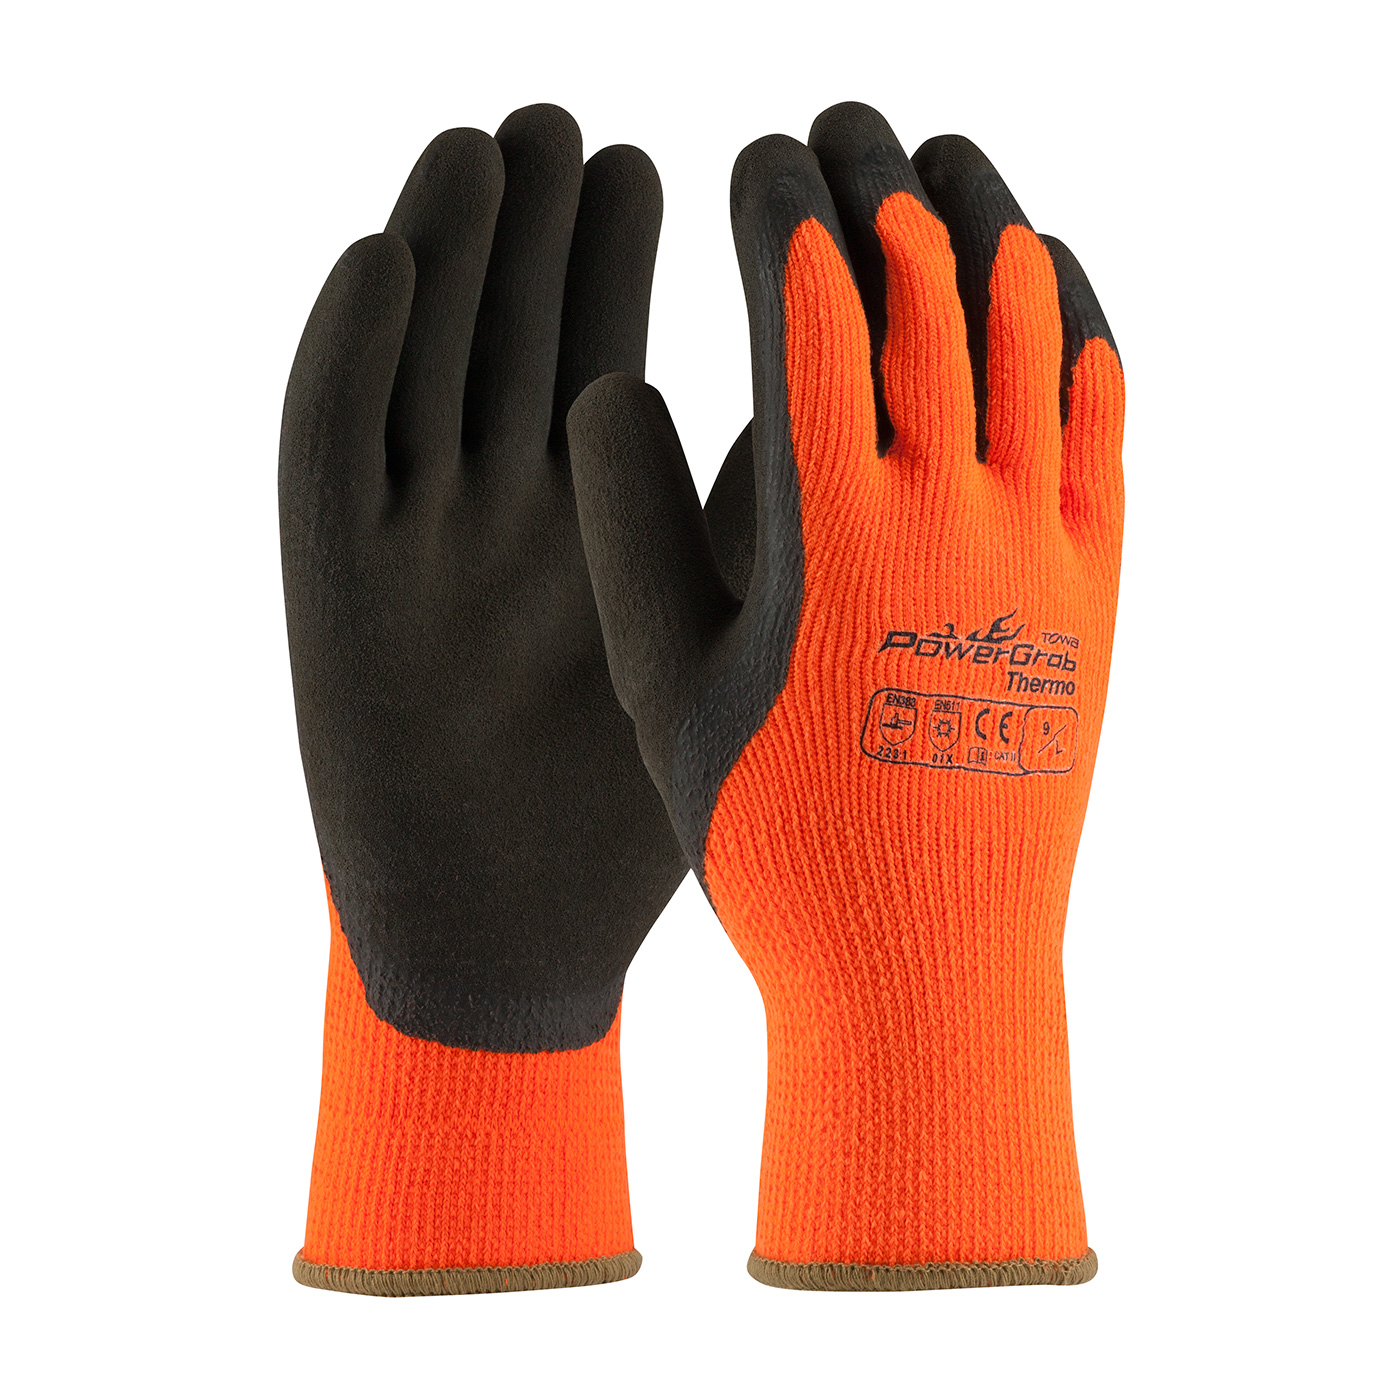 PIP 41-1400/XL PowerGrab Thermo Hi-Vis Seamless Knit Acrylic Terry Glove with Latex MicroFinish Grip on Palm & Fingers - X-Large PID-41 1400 XL